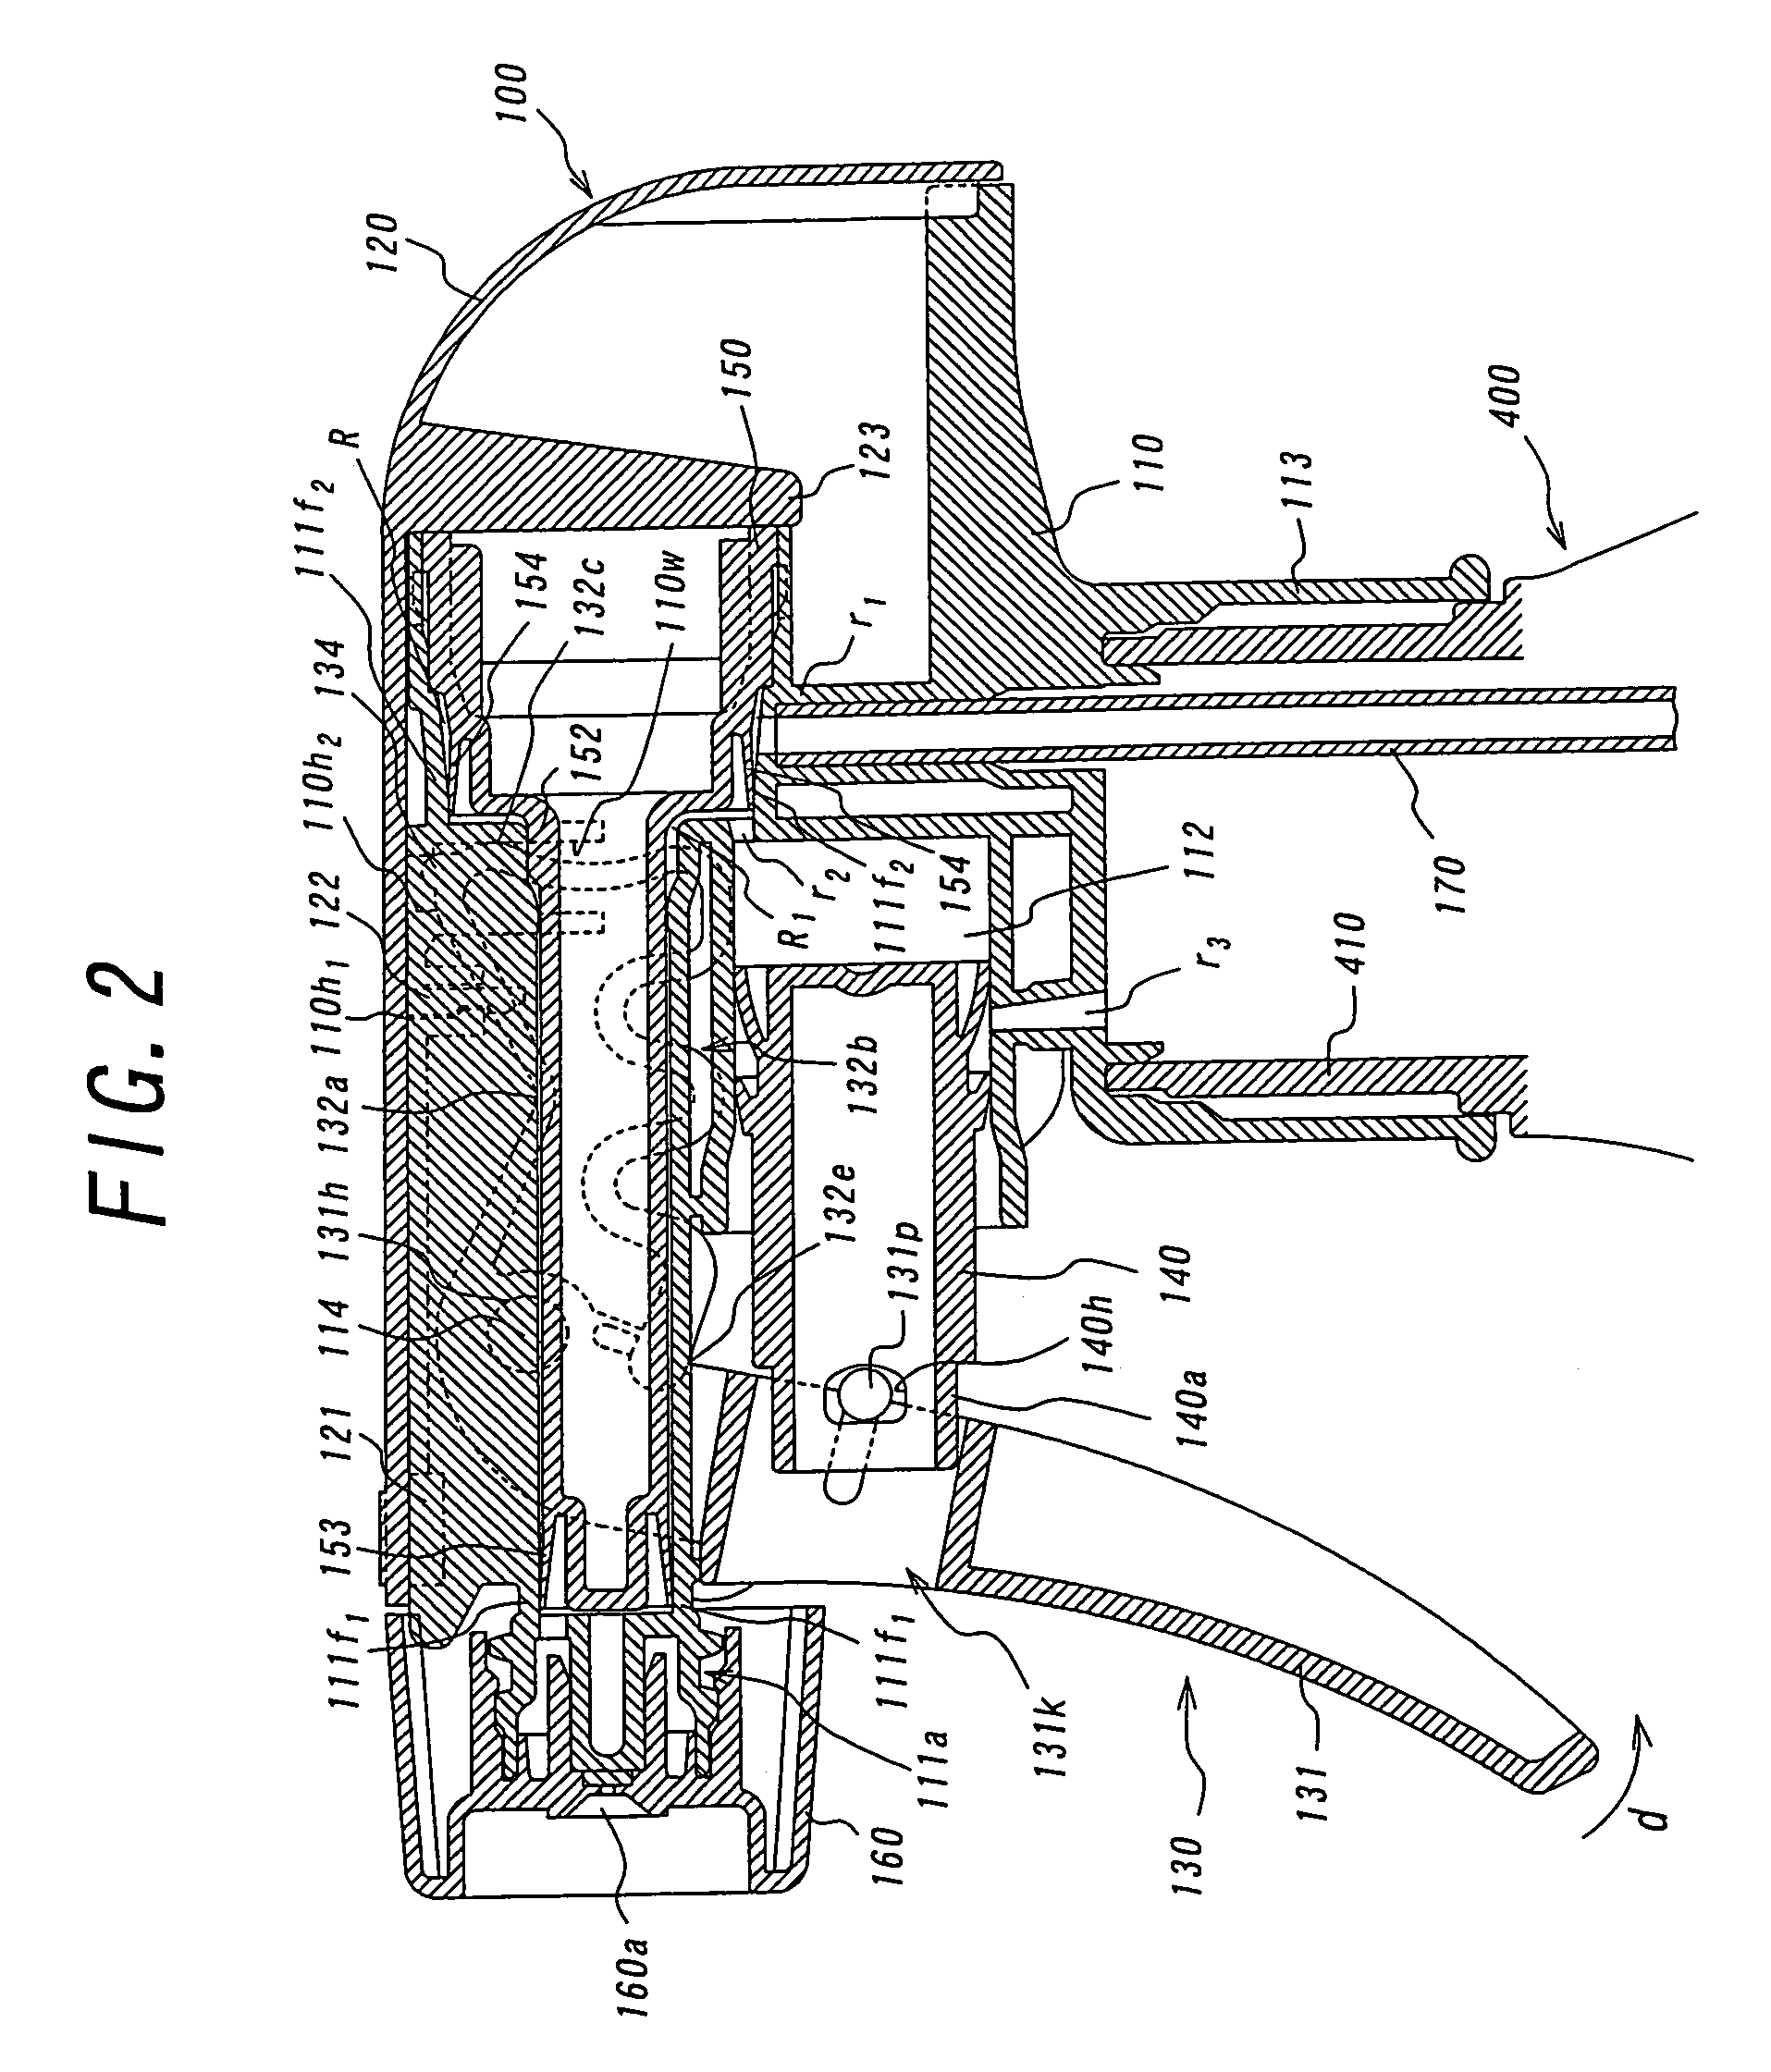 Trigger type fluid ejector